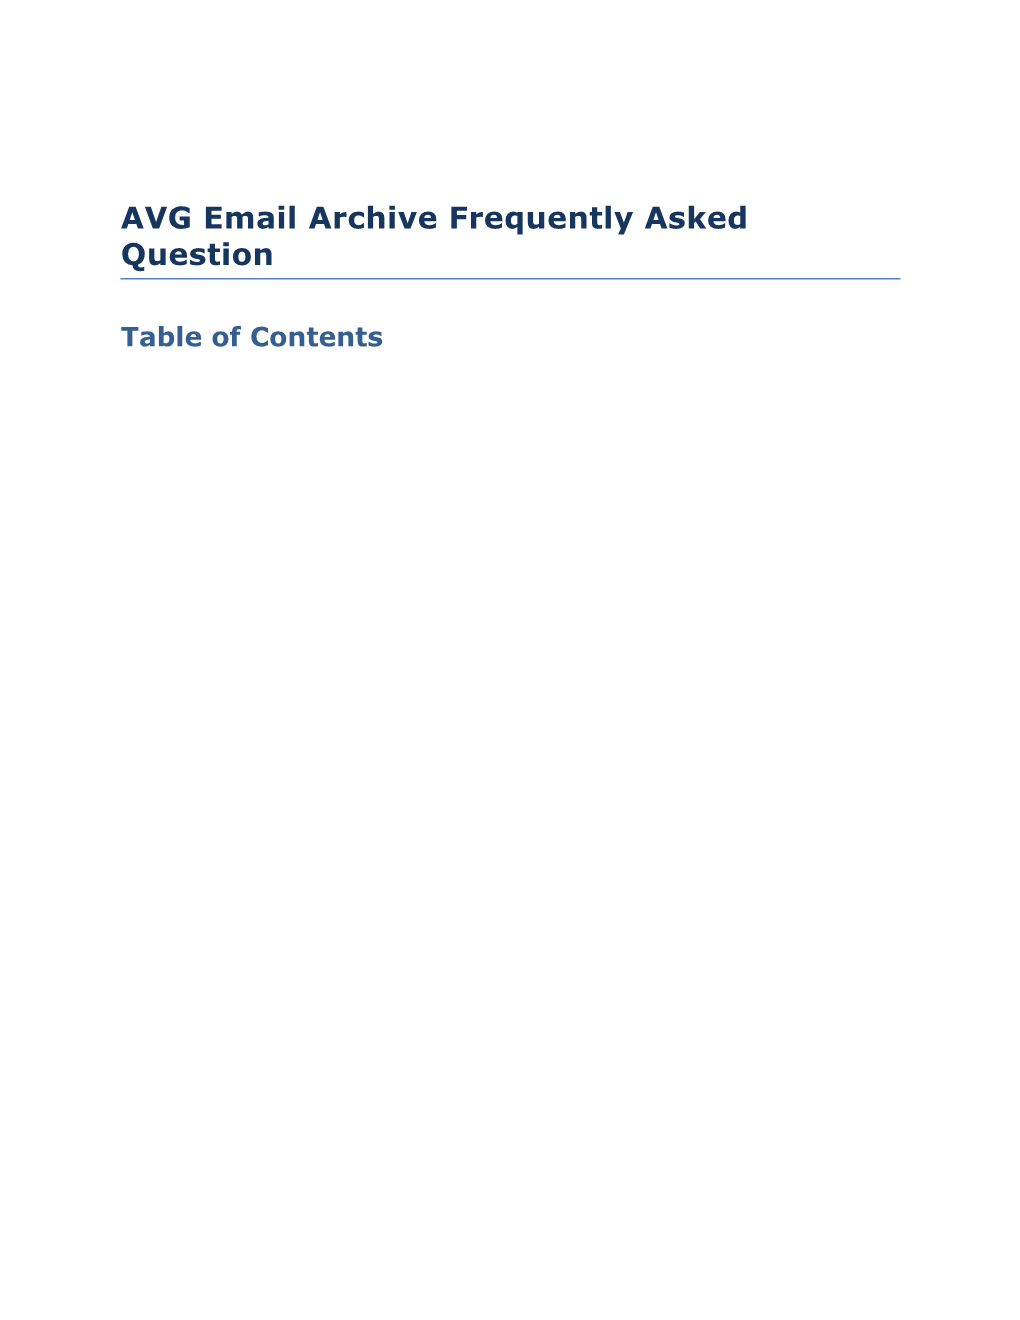 AVG Email Archive Frequently Asked Question